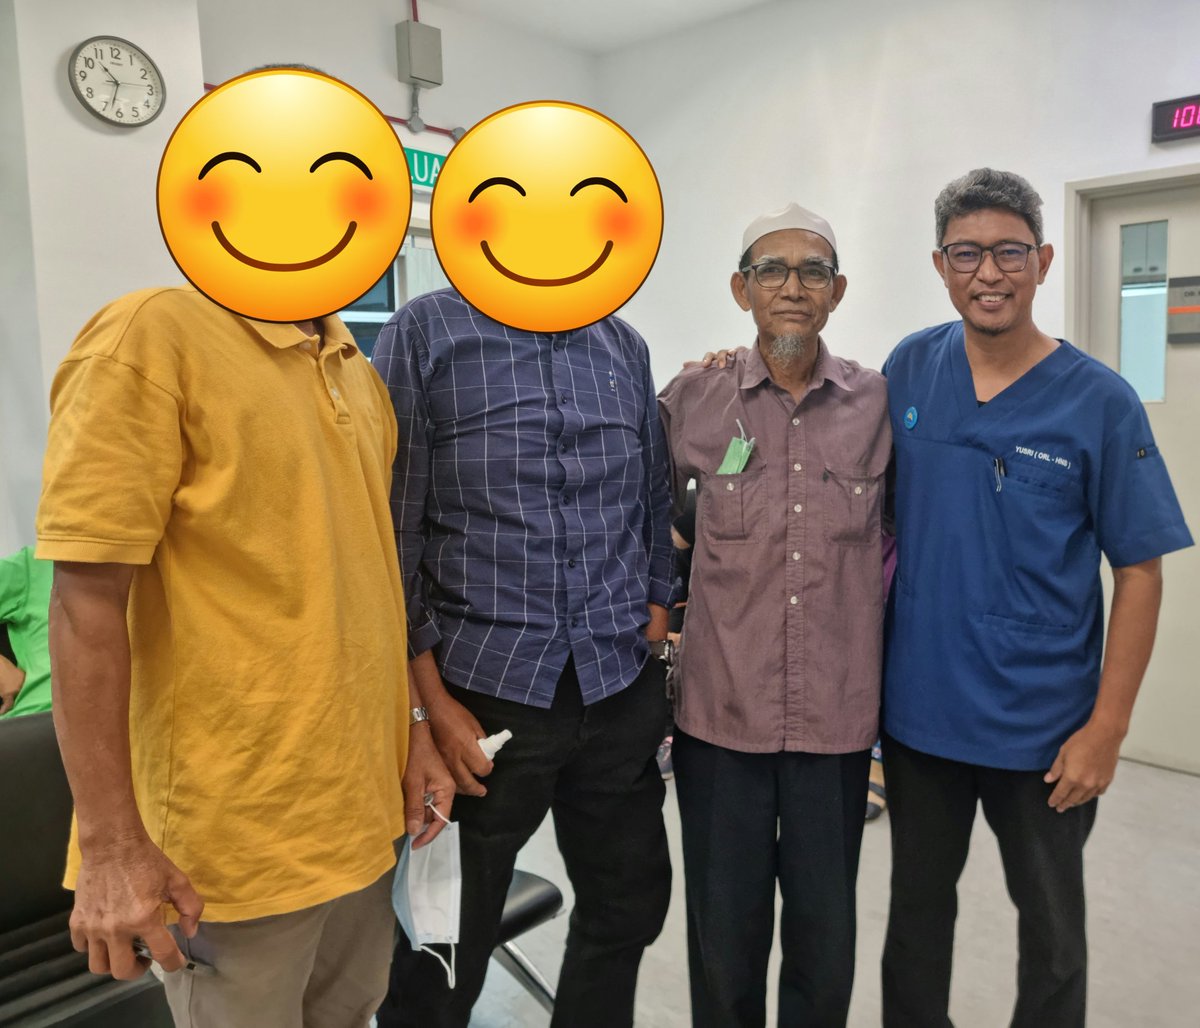 Quite an emotional day + happiness in my clinic. The gentleman besides me completed his 5 yrs follow up following treatment for #Nasopharyngealcancer. He gave me a big hug n some drops of tears 😭. The other 2 guys also cancer survivors for the past 2 years.